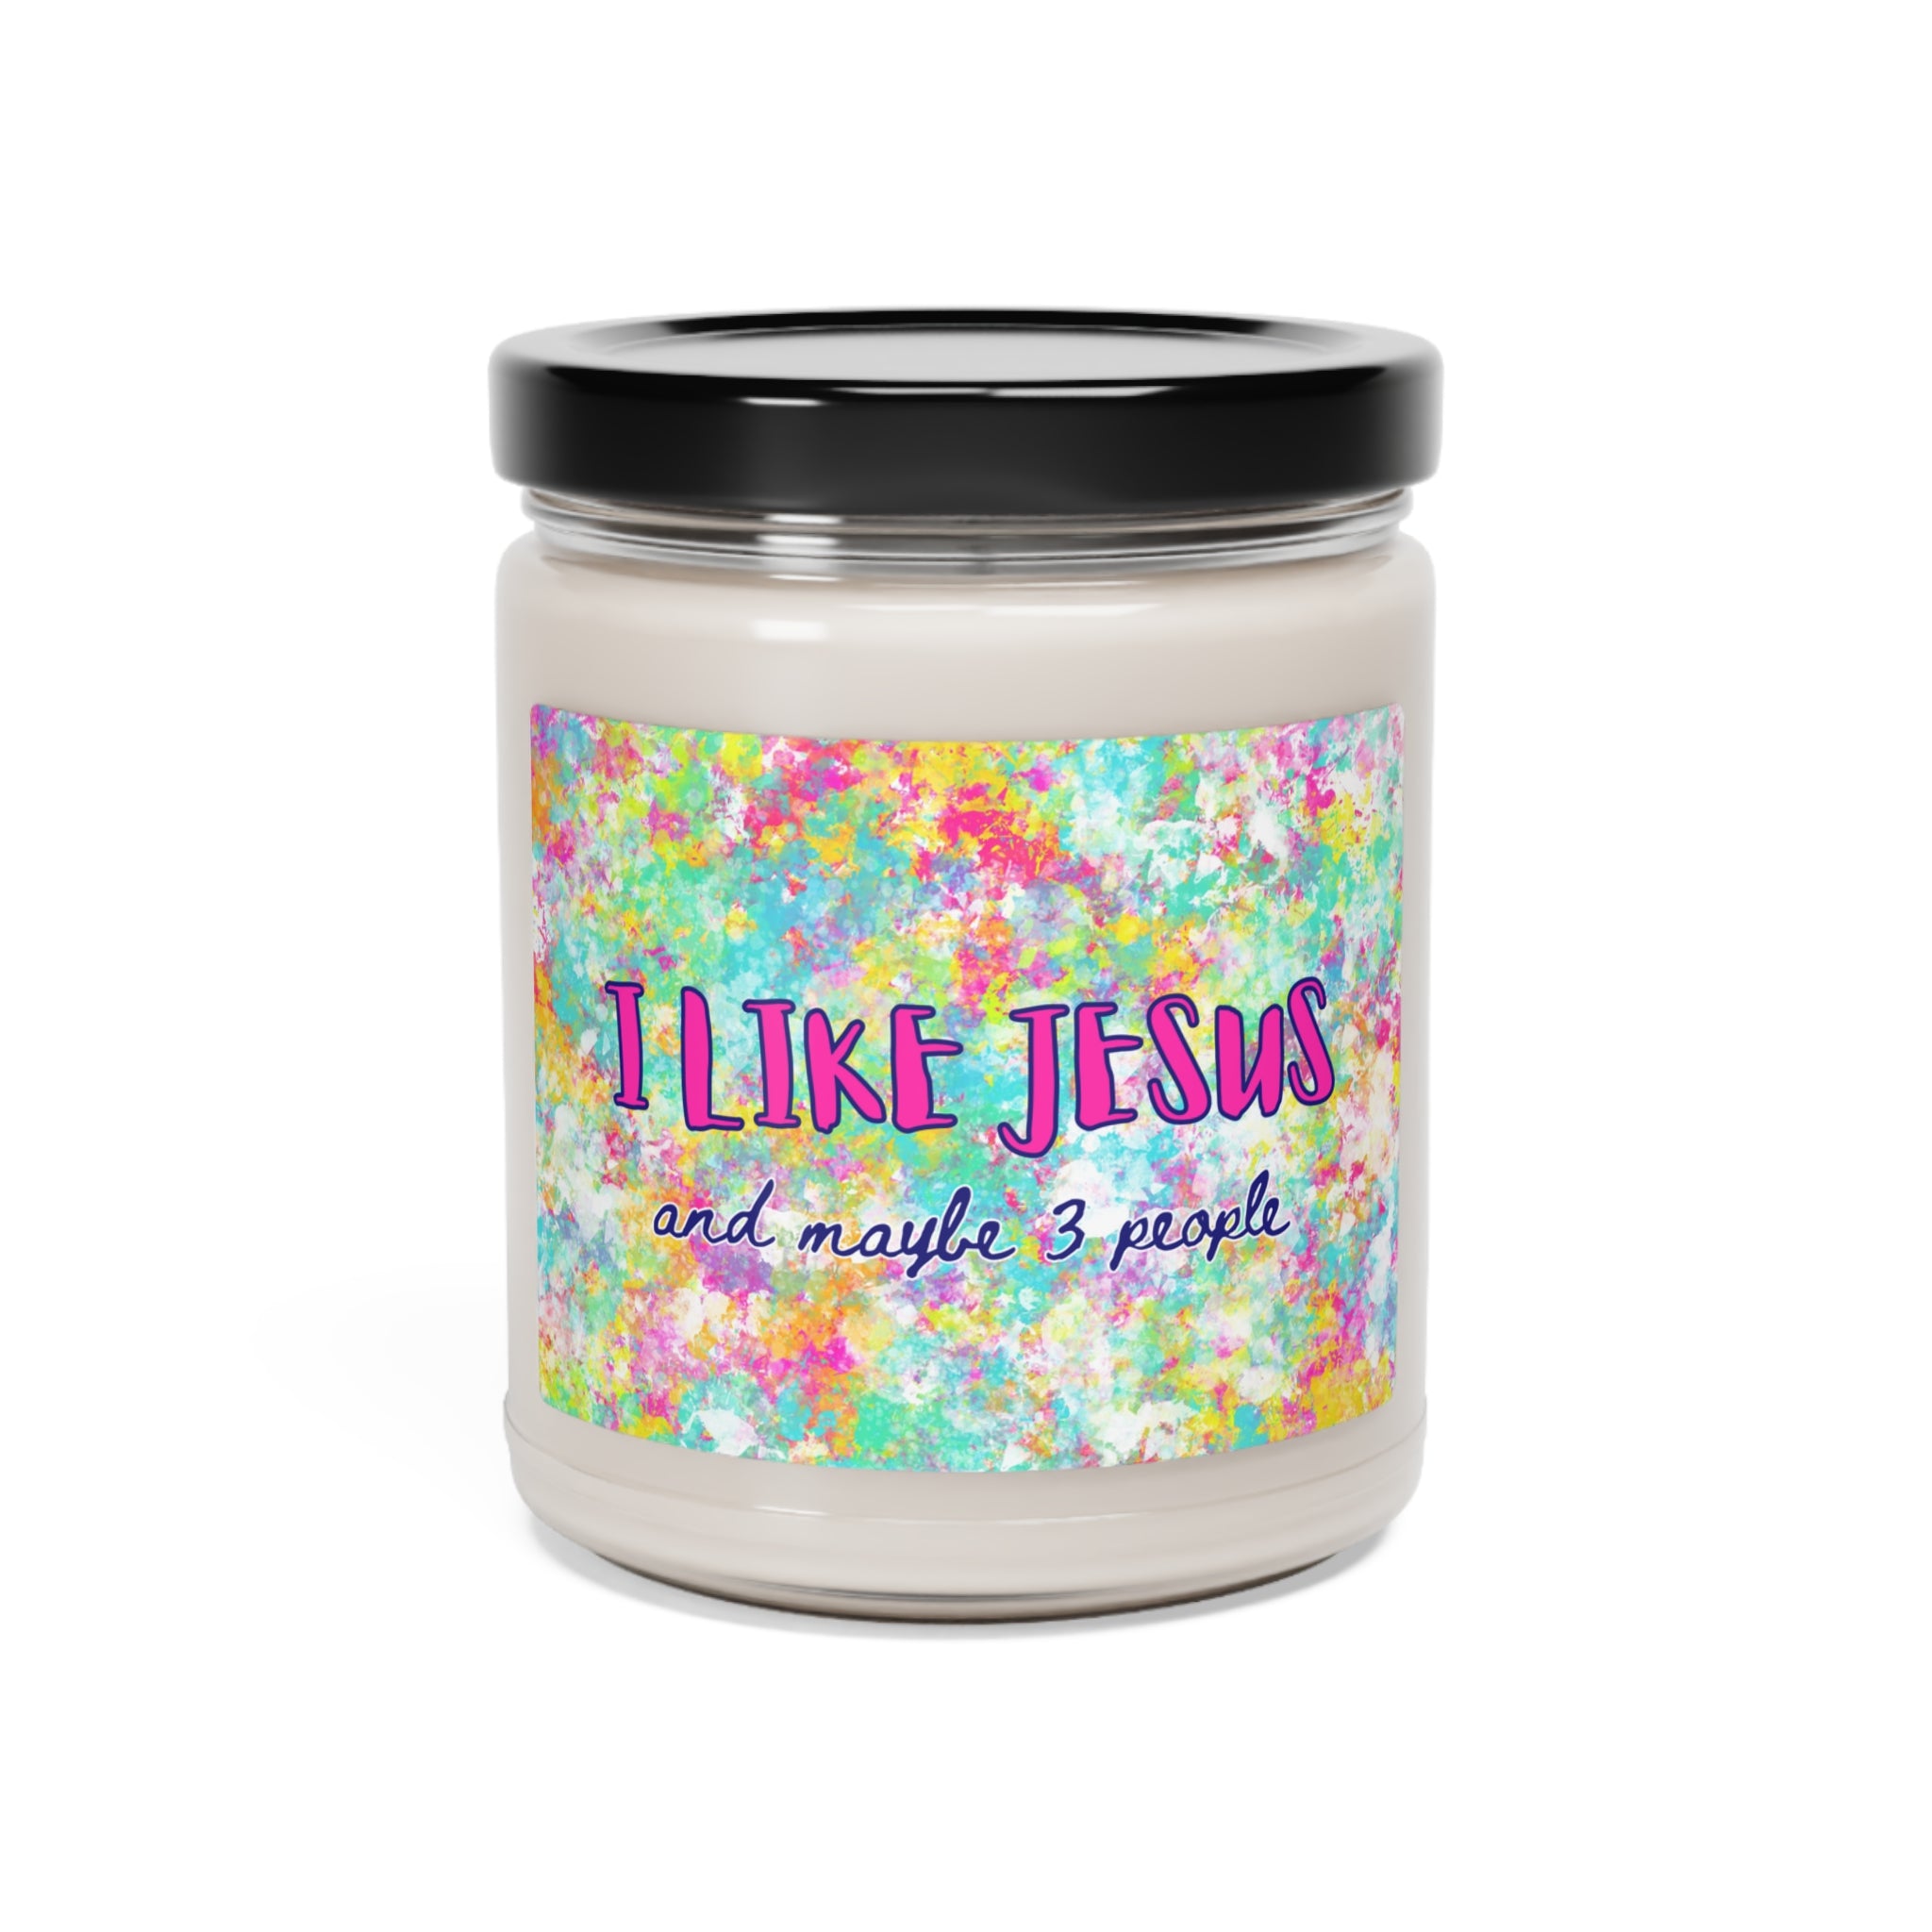 I Like Jesus Scented Soy Candle